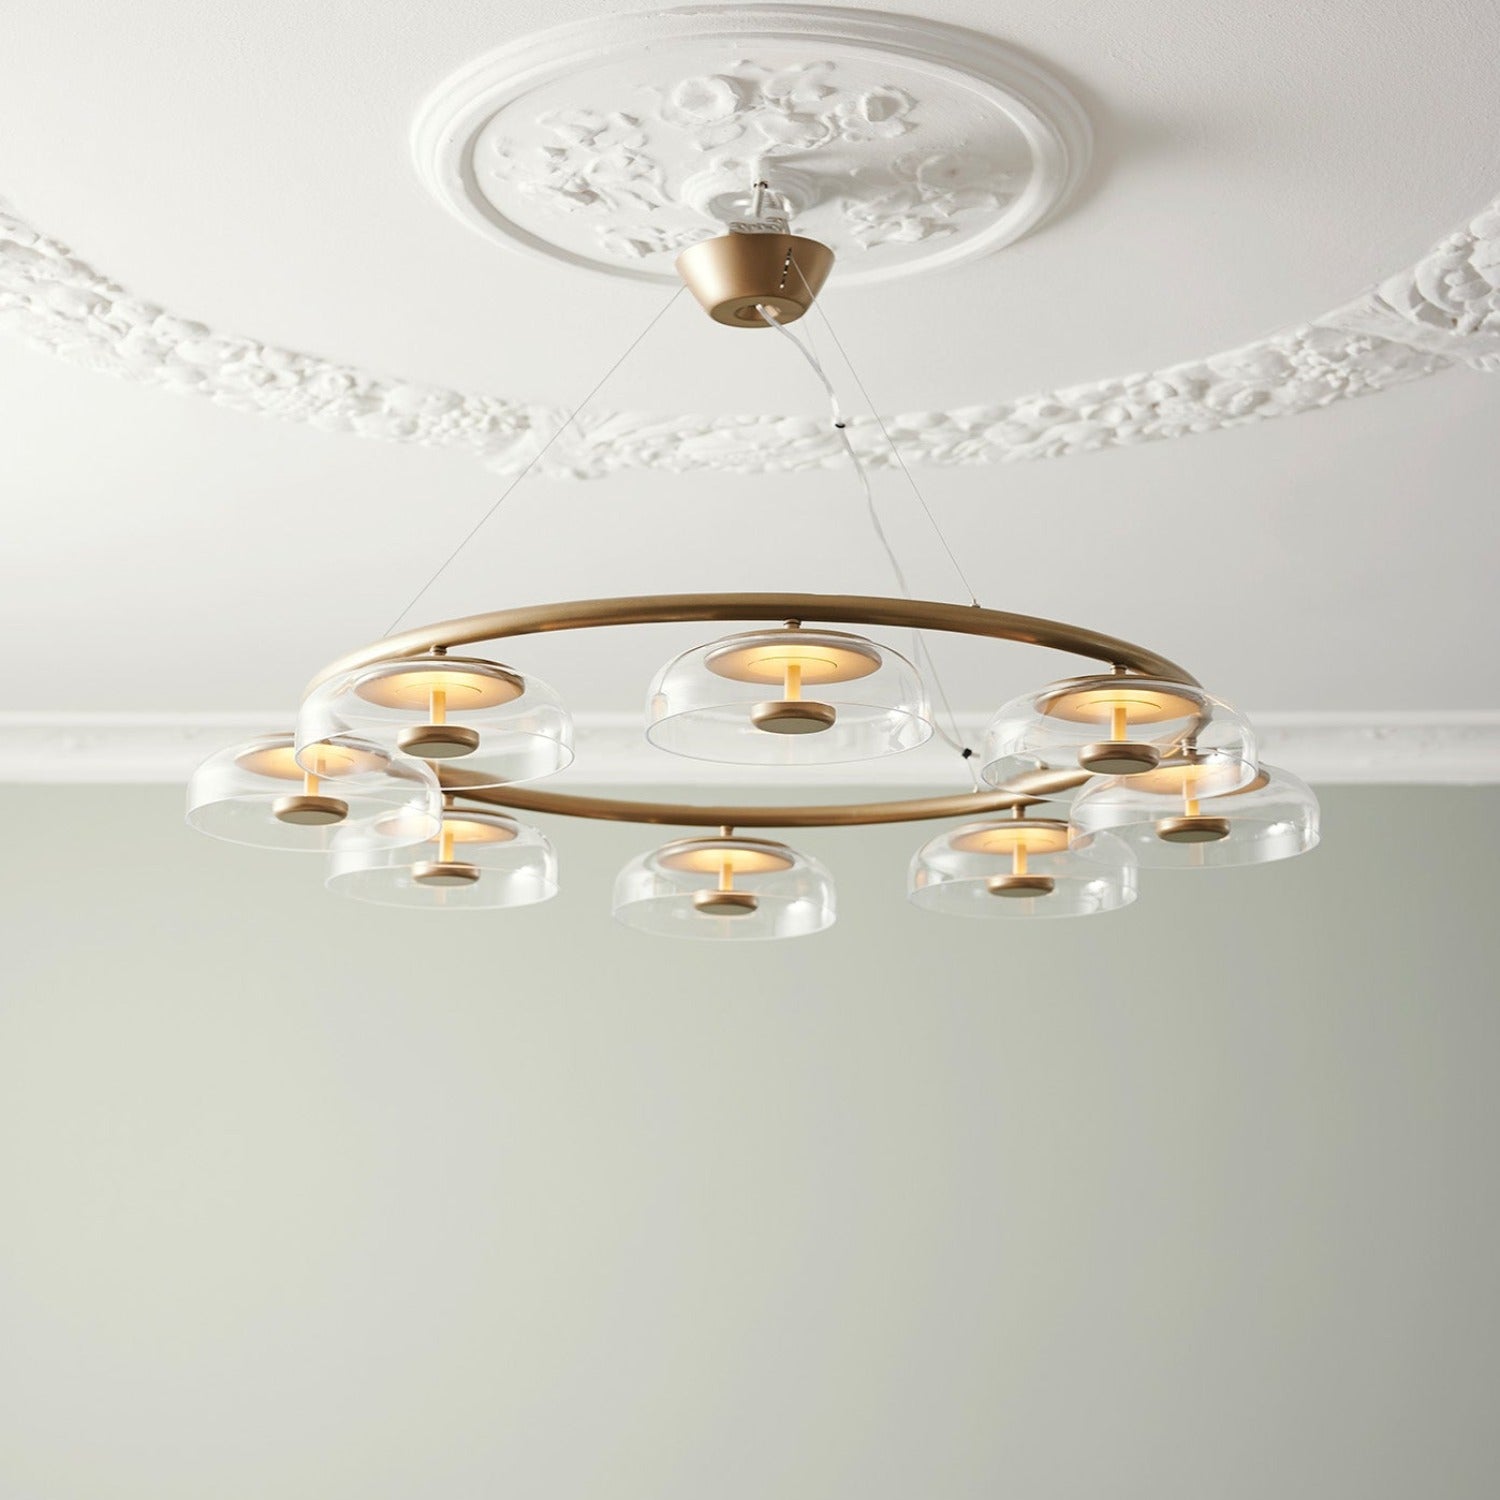 BLOSSI 8 - Large elegant luxury chandelier in glass and integrated LED